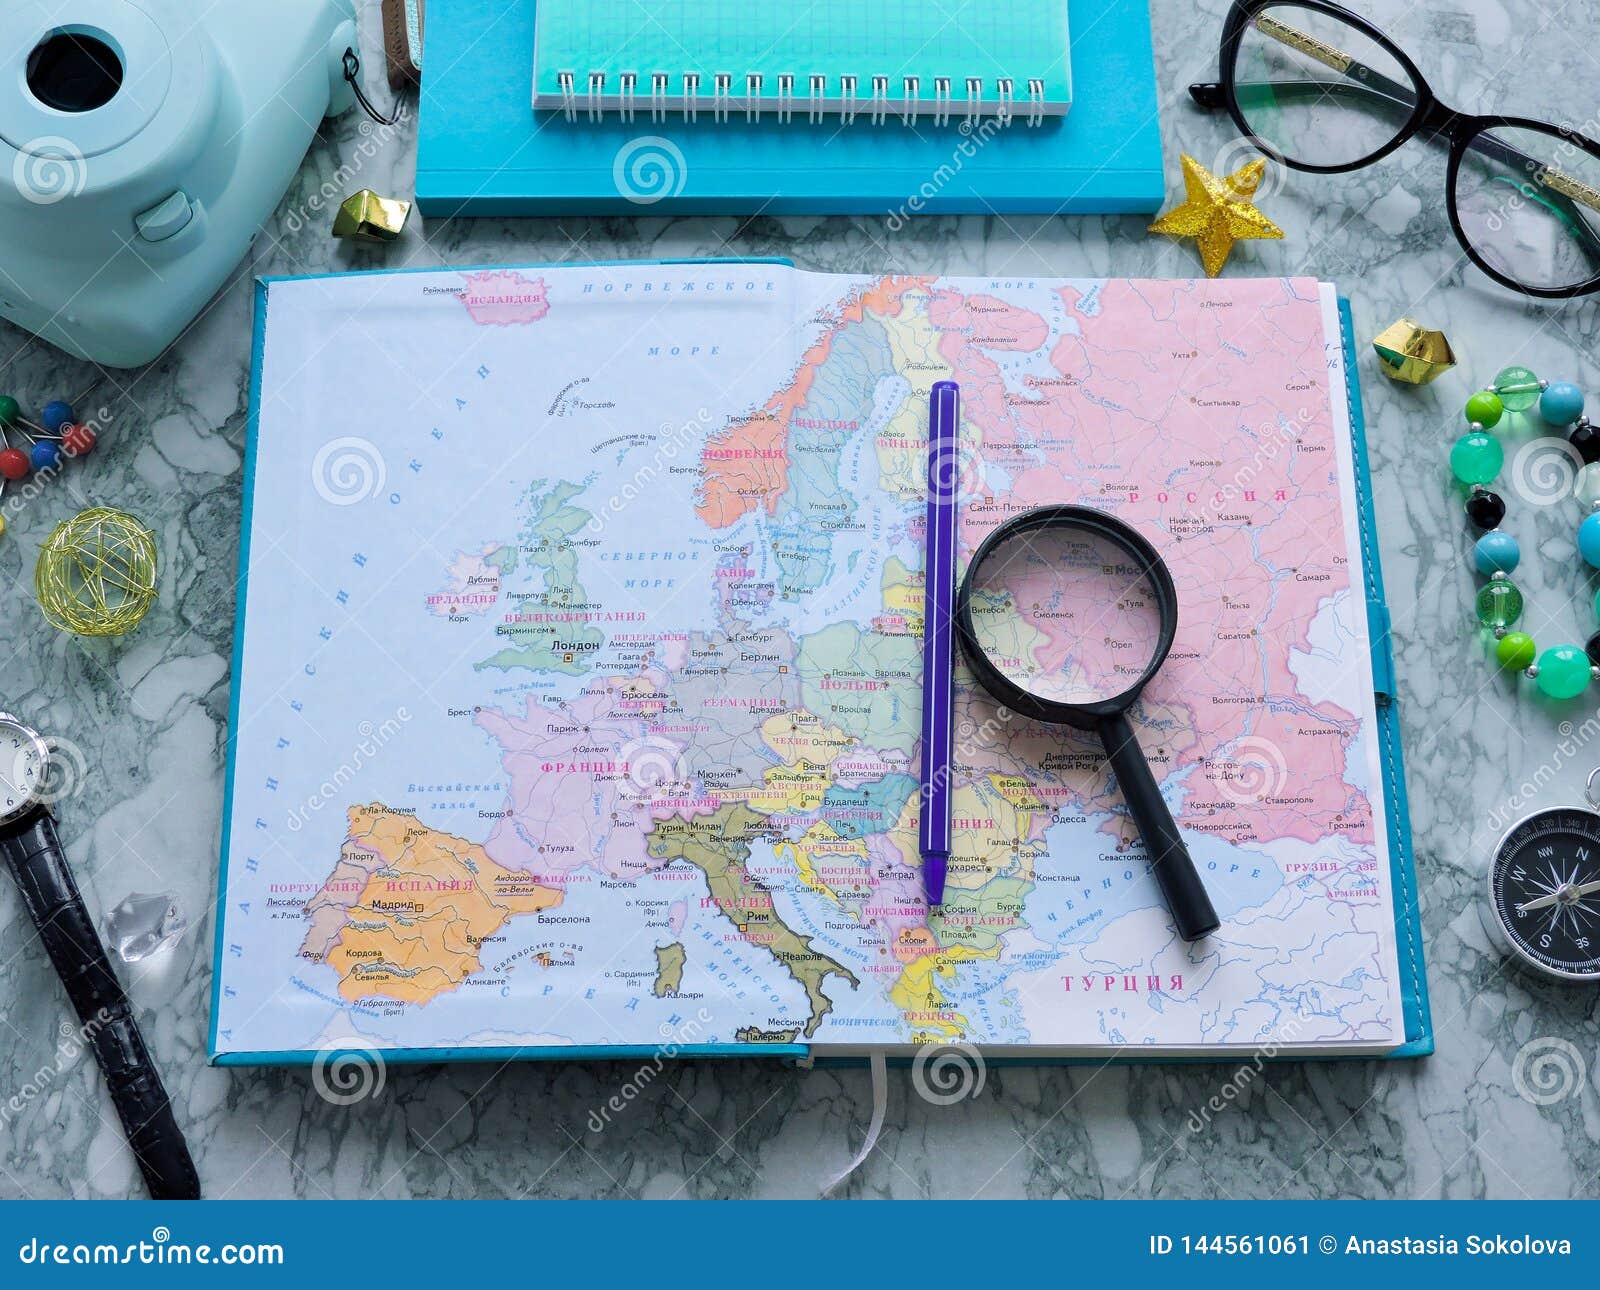 Top View of a map and items. Planning a trip or adventure. Travel planning dreams. Map of the world. Travel, tourism and vacation concept background. Stylish notebook, map and magnifier. Flat lay.